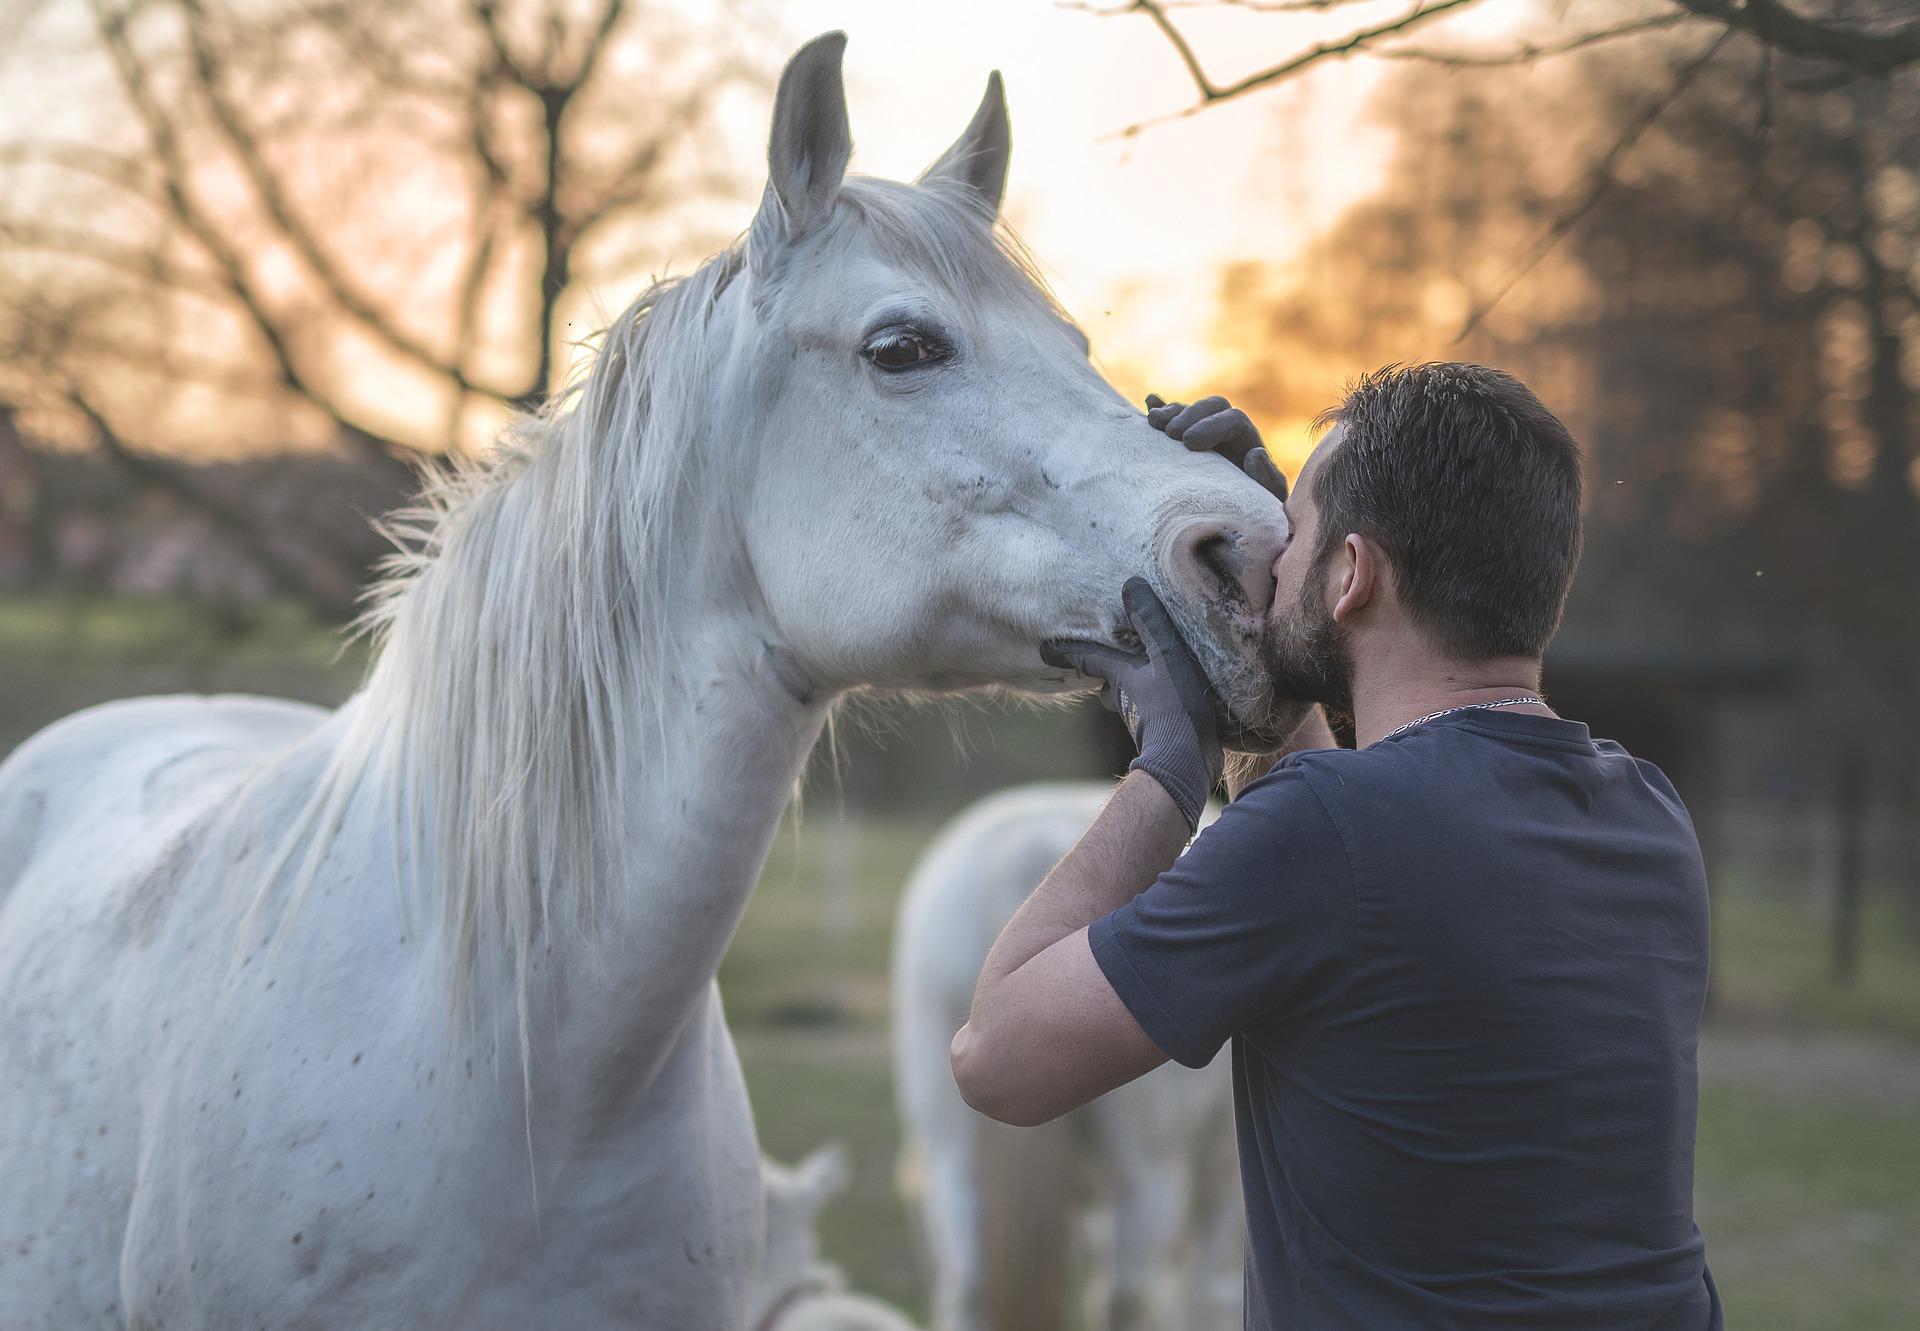 Man Kissing horse nose. Equine Compounding Pharmacy